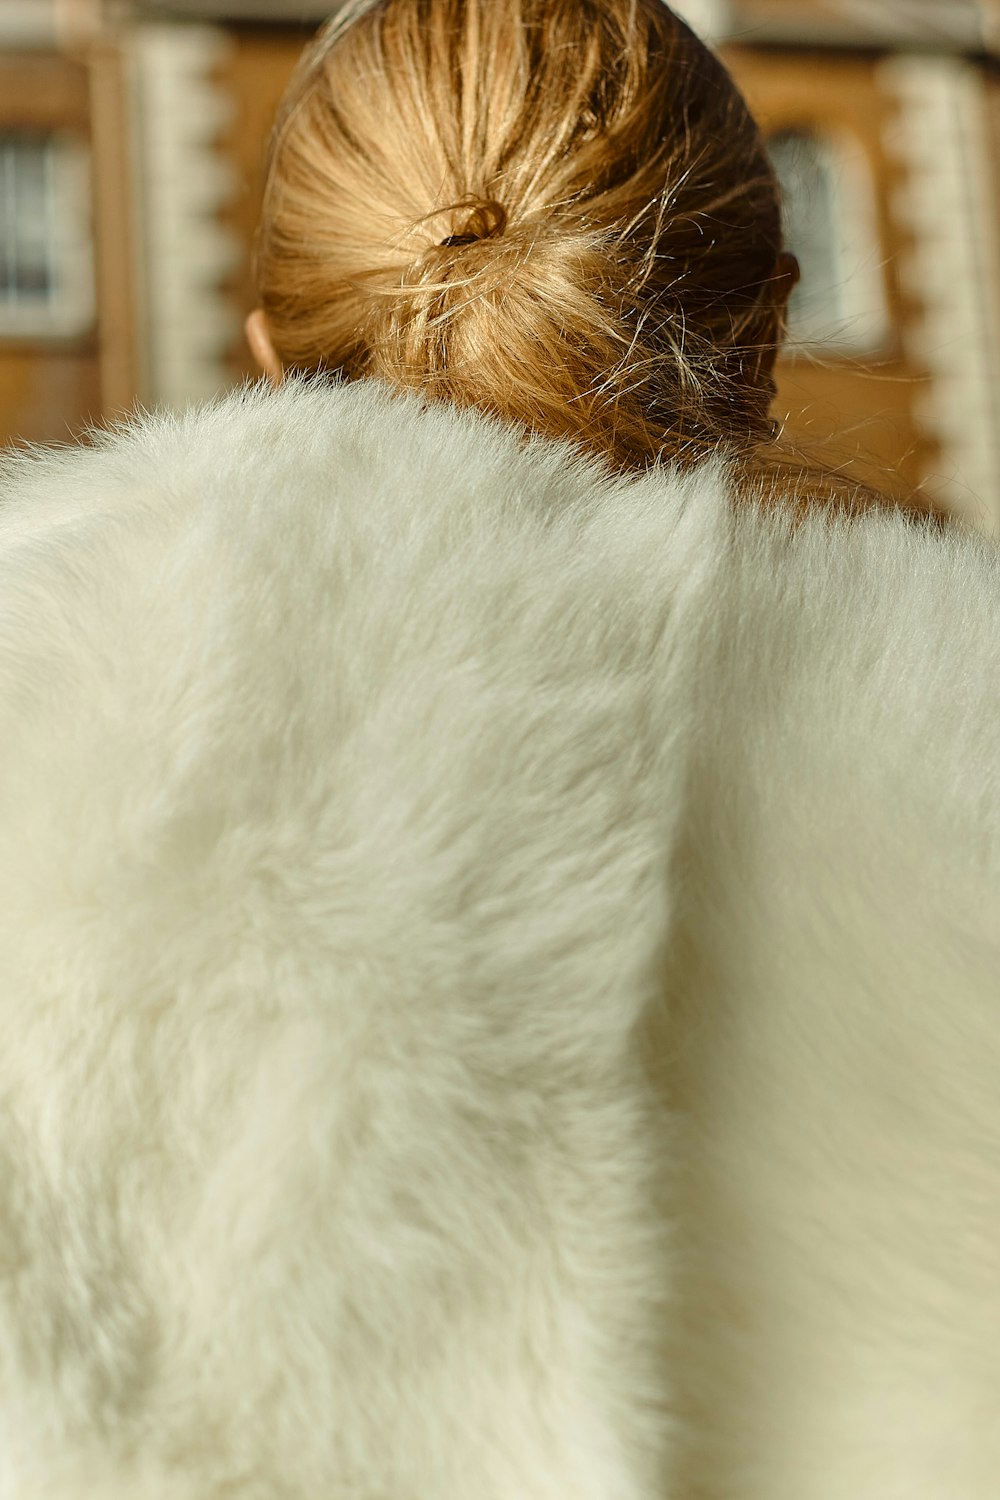 white fur textile on brown wooden table